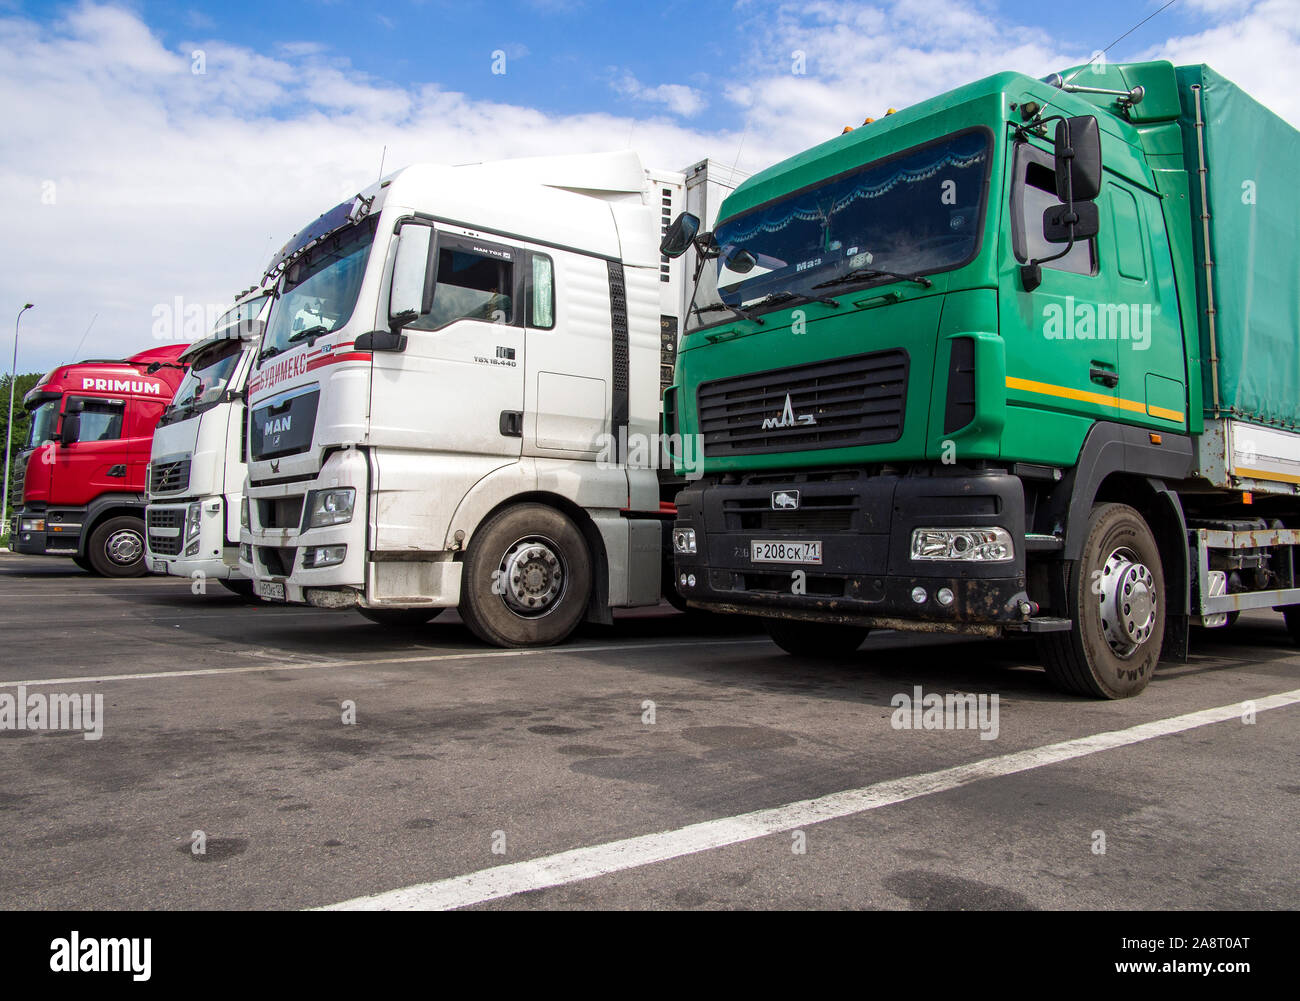 Voronezh, Russia June 13, 2019: Trucks are in the street parking Stock Photo